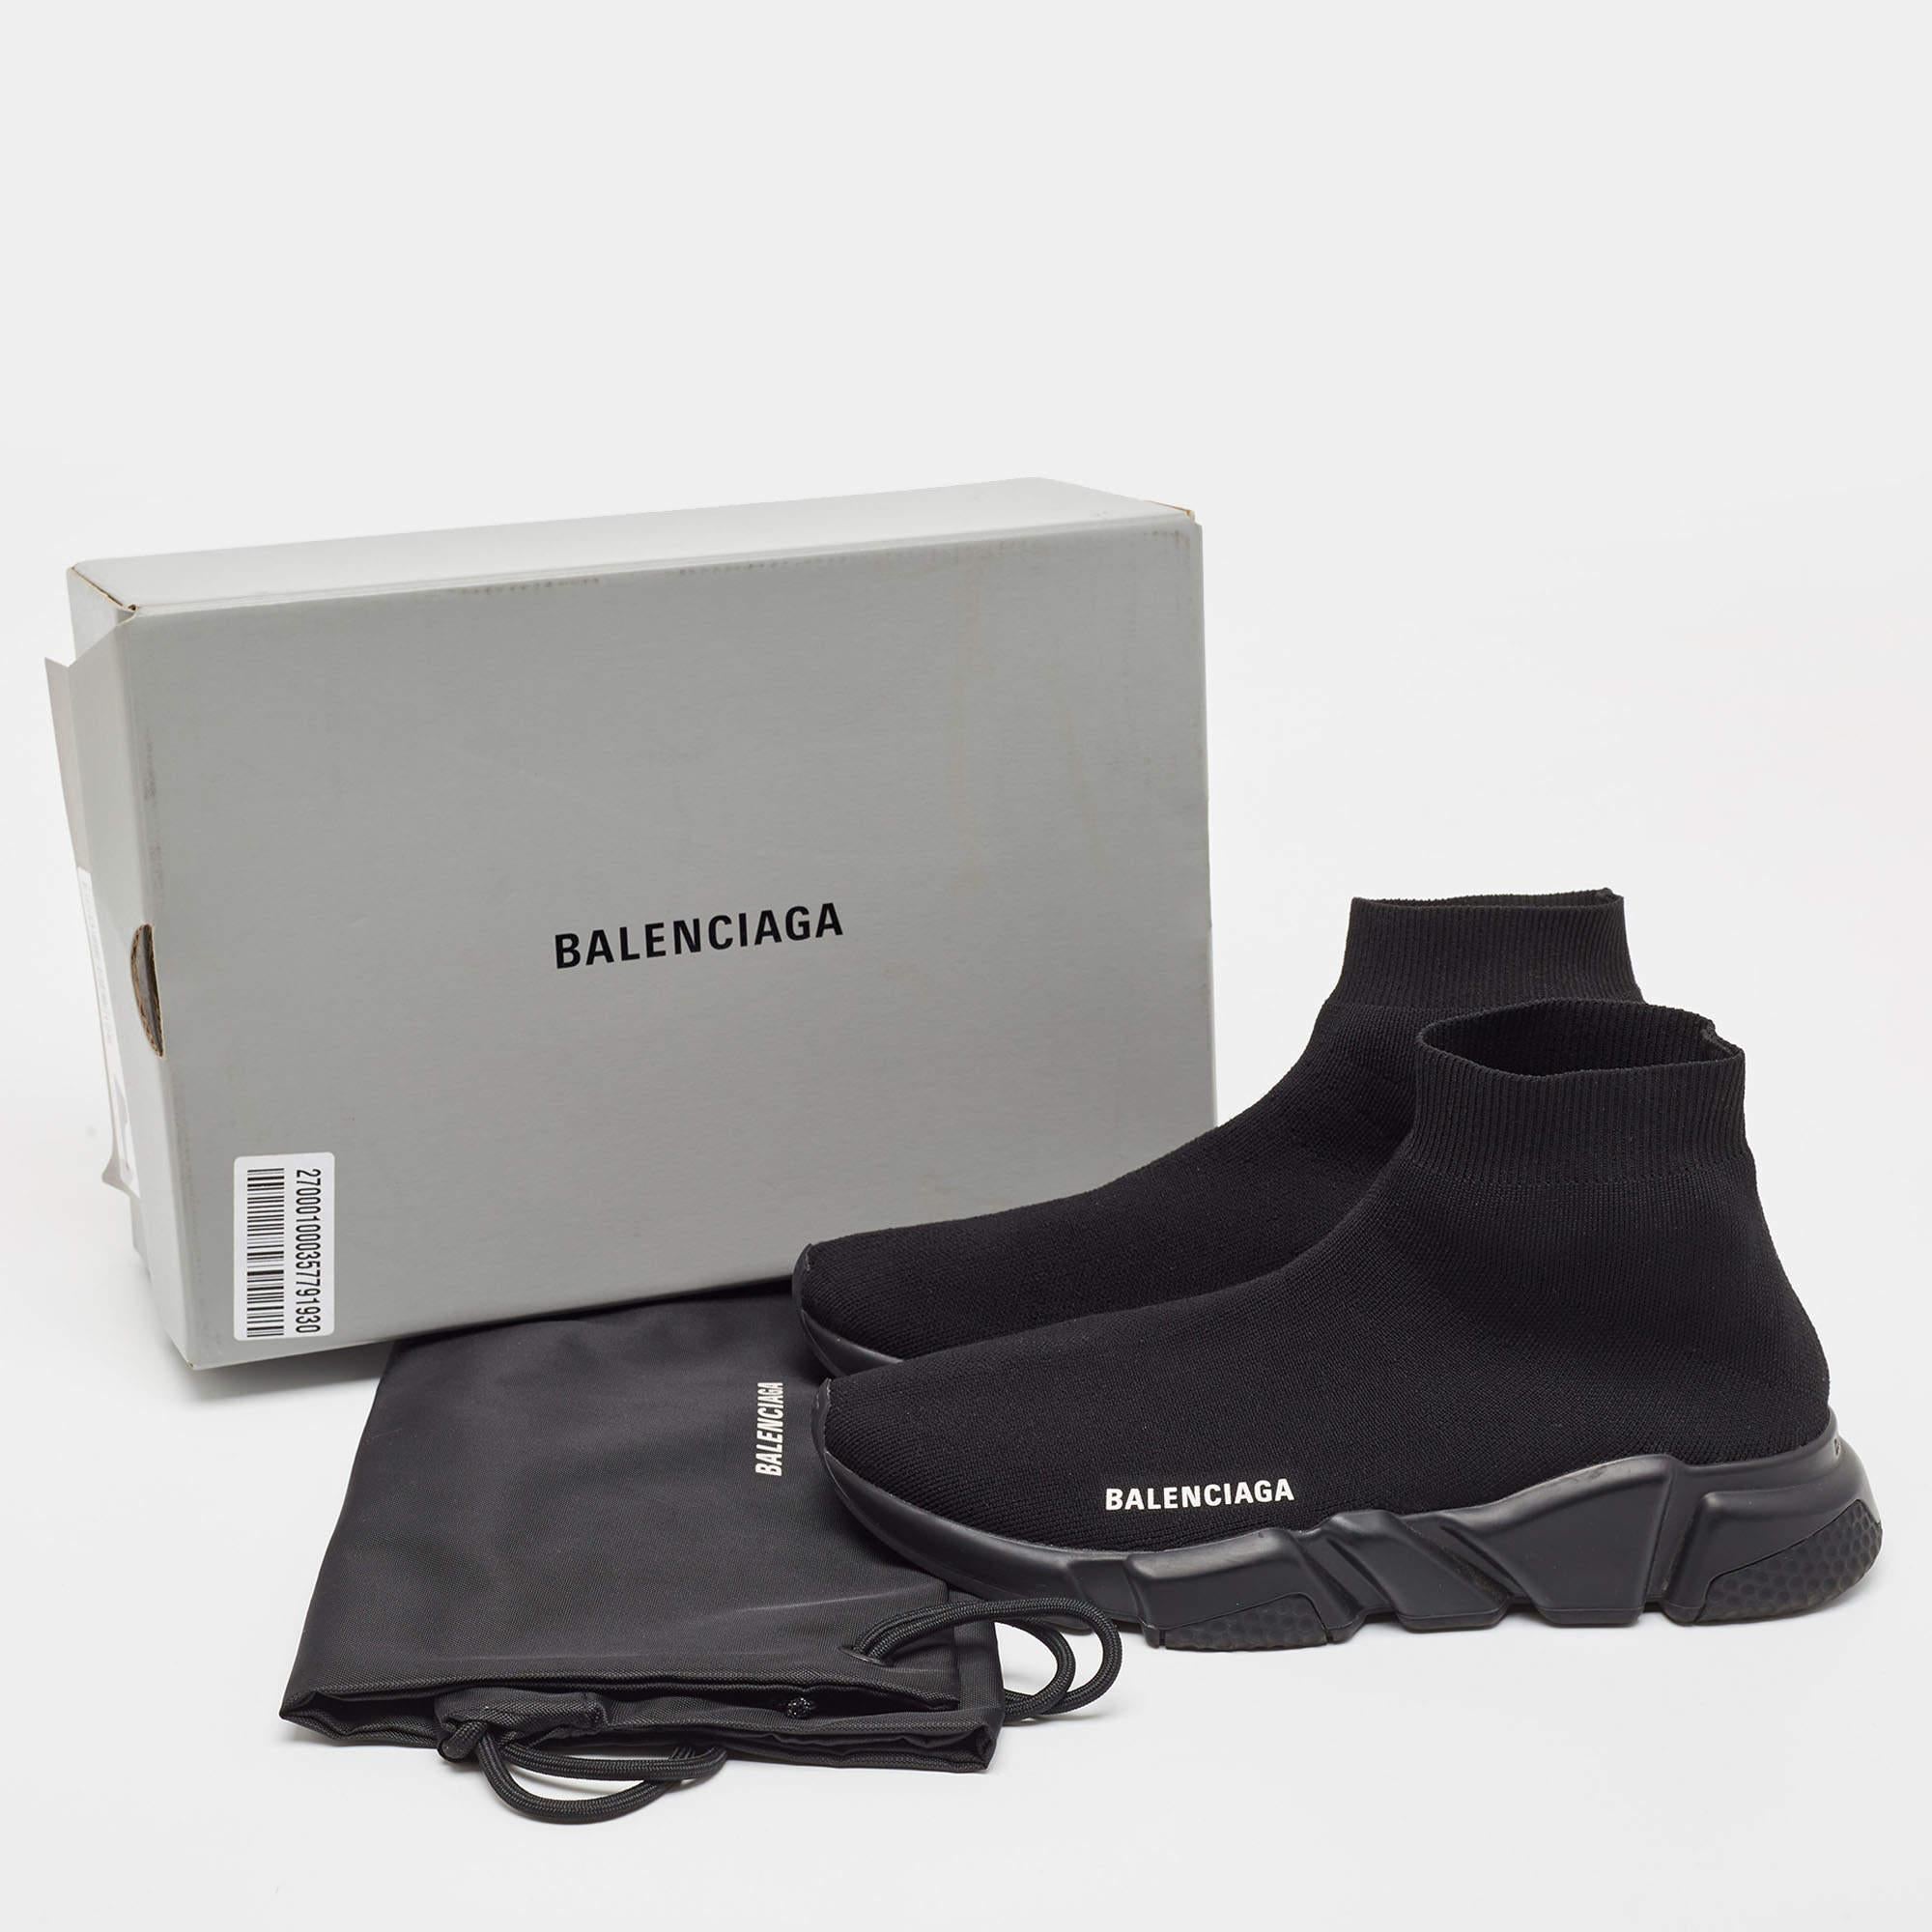 Balenciaga Black Knit Fabric Speed Trainer Sneakers Size 41 For Sale 5